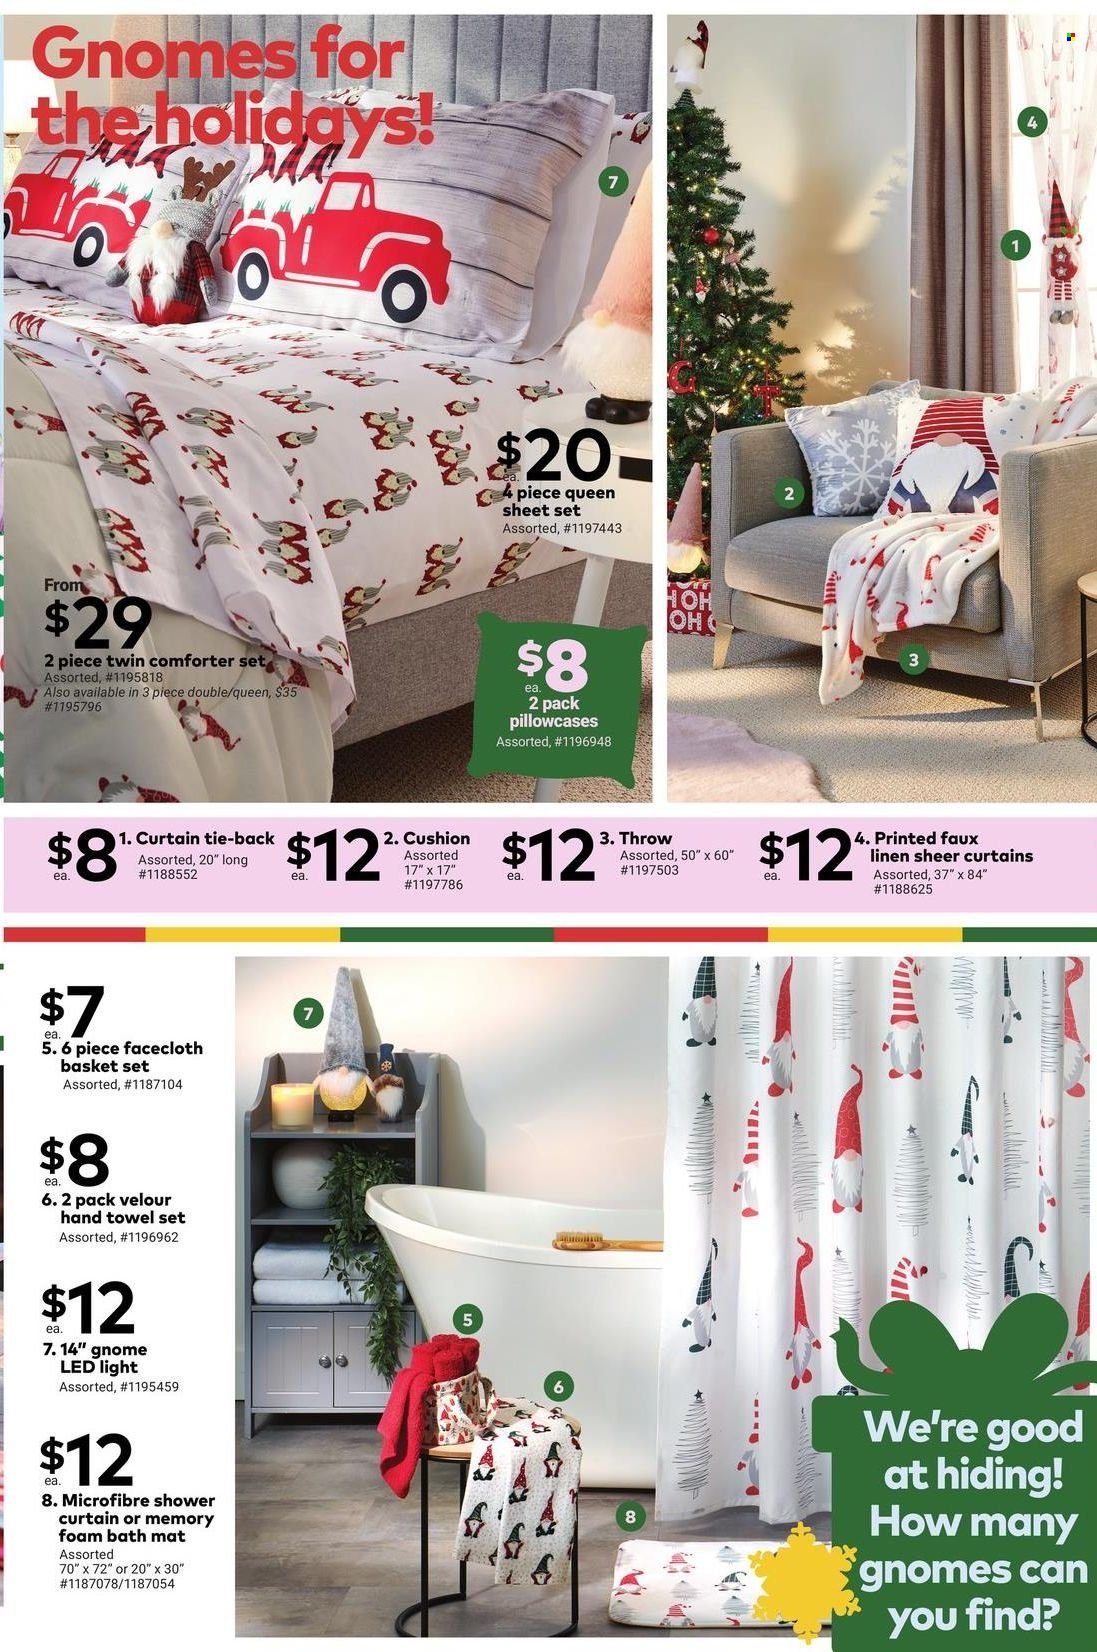 thumbnail - Giant Tiger Flyer - November 30, 2022 - December 13, 2022 - Sales products - basket, shower curtain, cushion, comforter, linens, twin comforters, pillowcase, queen sheet, curtain, bath mat, towel, hand towel, facecloth, LED light. Page 2.